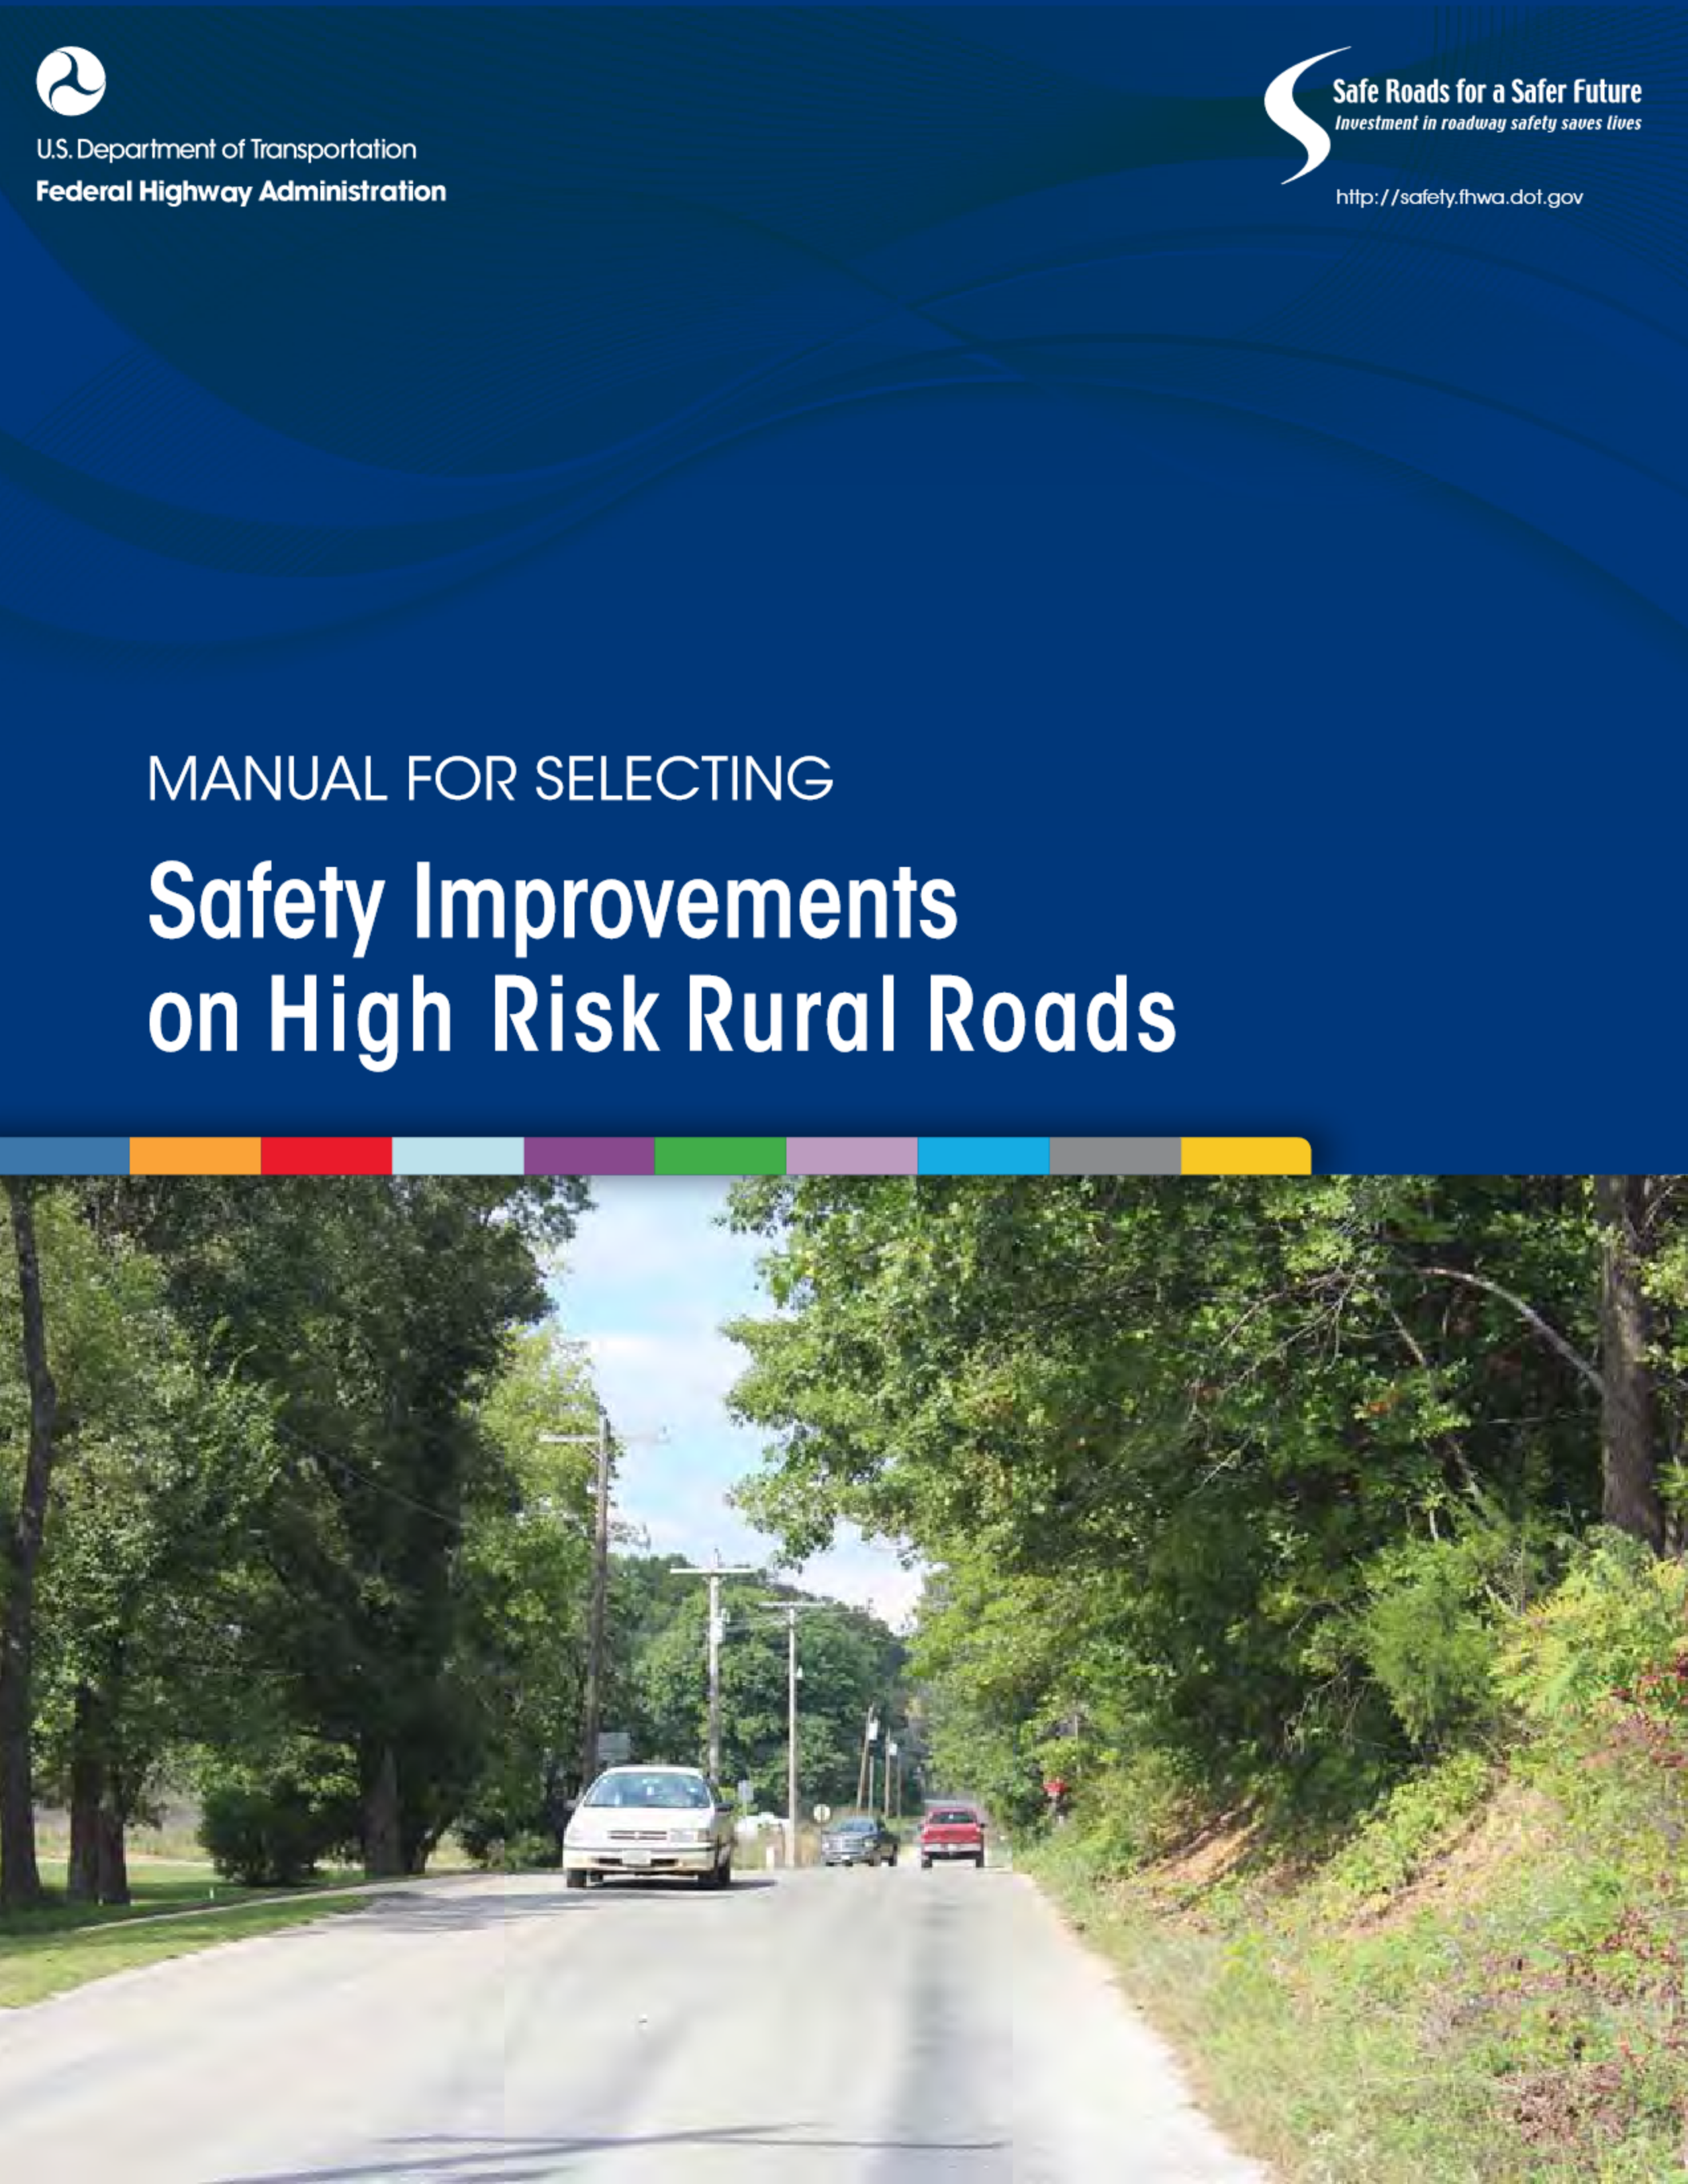 Safety Improvements on High-Risk Rural Roads